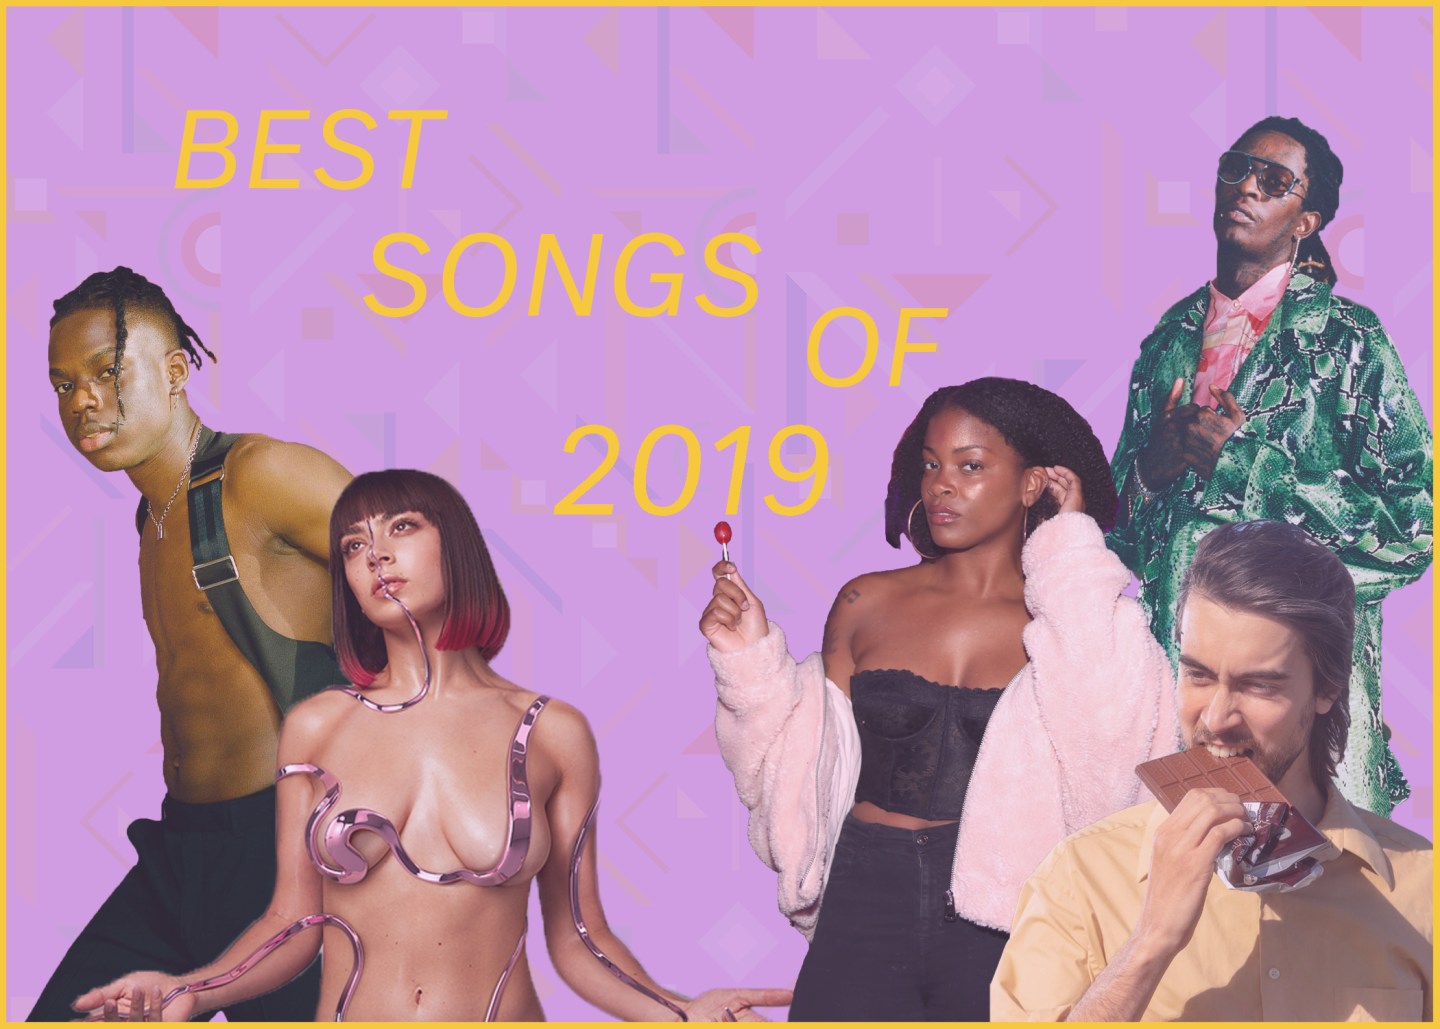 The best songs of 2019